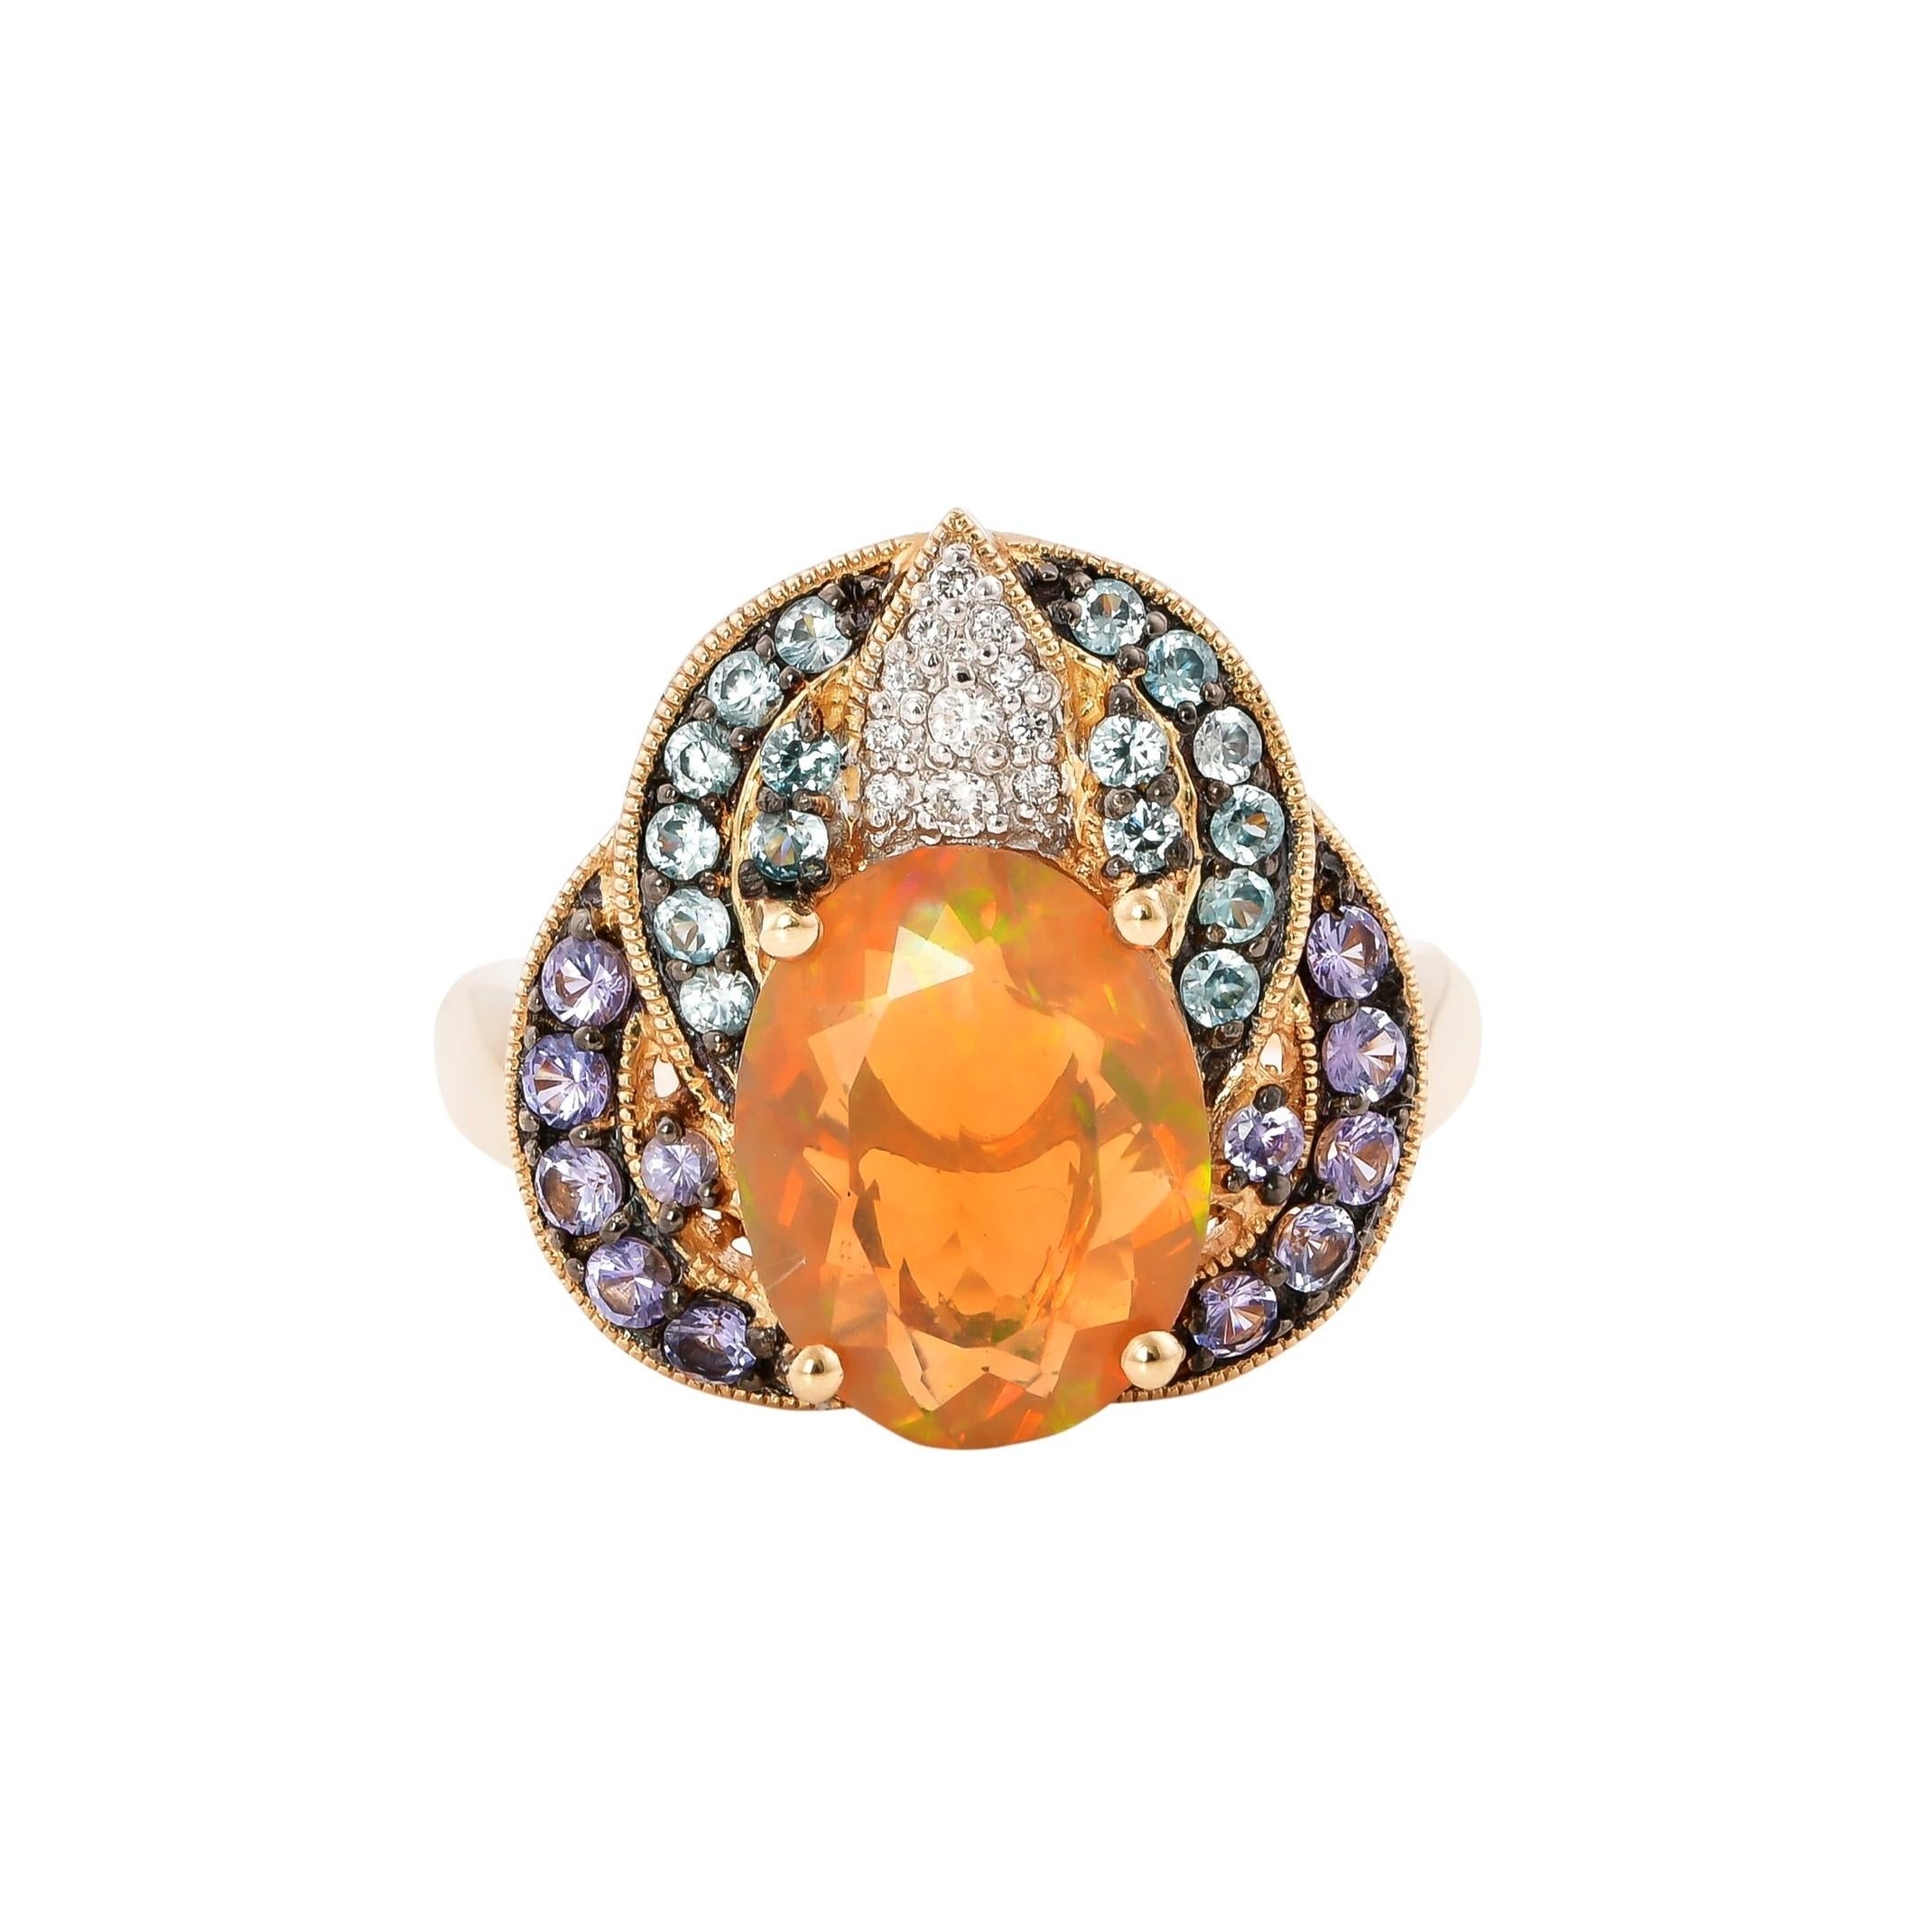 Oval Cut 2.02 Carat Ethiopian Opal Ring in 14 Karat Yellow Gold with Diamonds For Sale